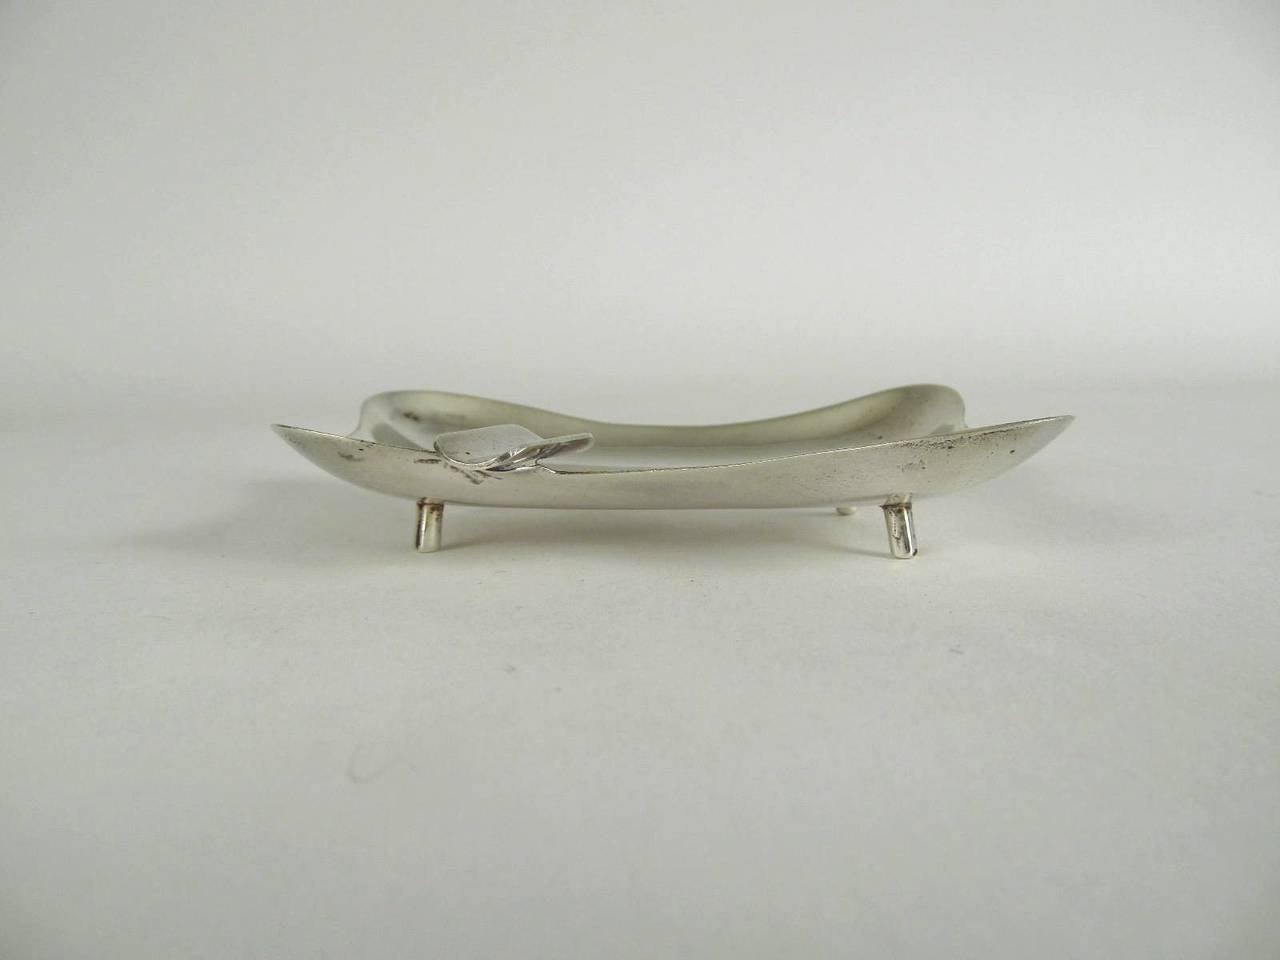 A very nice sterling ashtray done in the free-form or biomorphic style of the late 1940s and 1950s. It's four lobed and stands on four feet. And comes with a felt presentation bag from Sanborns department store in Mexico City.